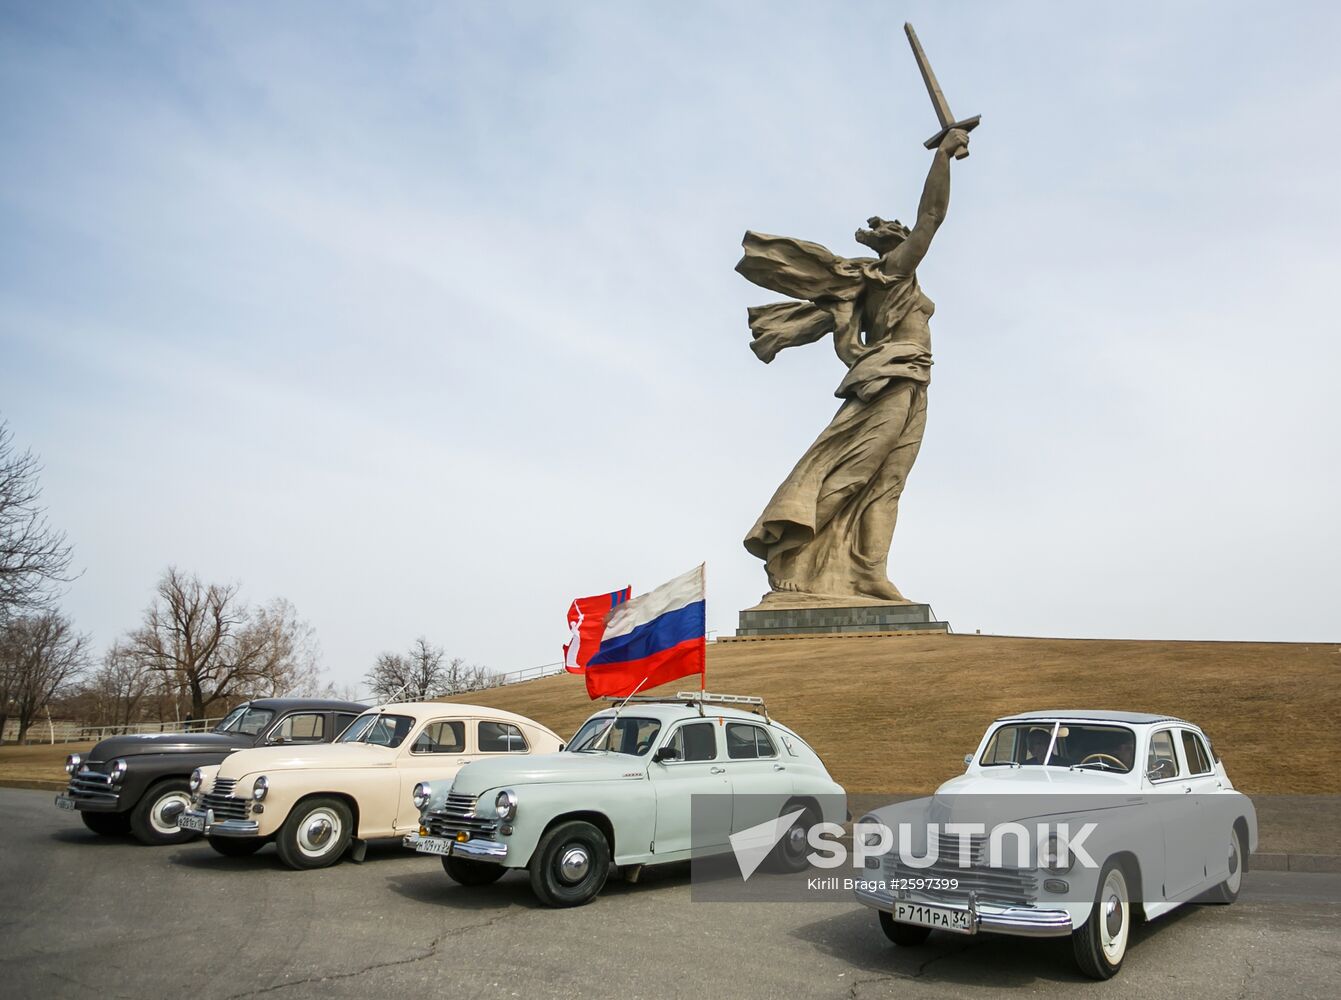 Victory - One for All vintage car rally in Volgograd